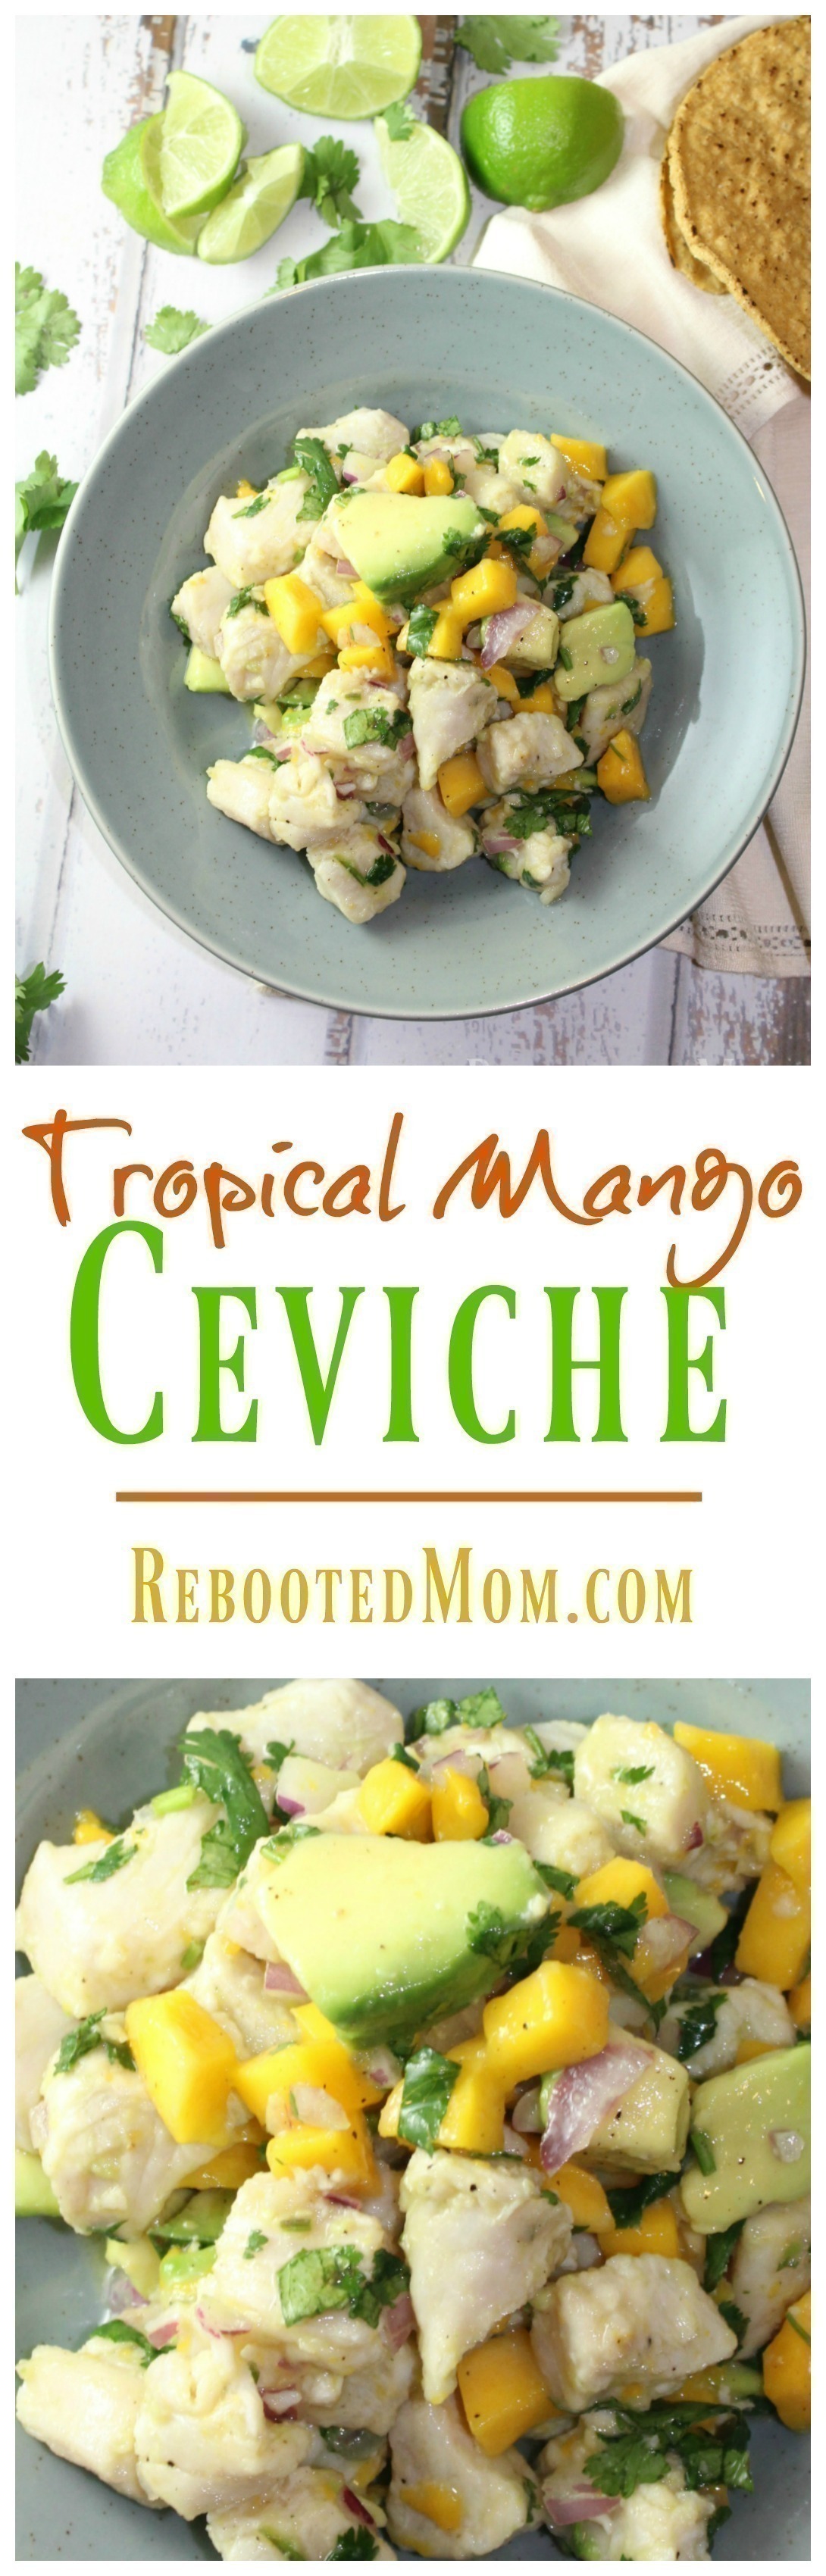 This tropical mango ceviche is a mixture of mango, avocado, onion and Mahi Mahi bathed in a mixture of orange juice with a punch of pepper. Best eaten with tostadas or tortilla chips.